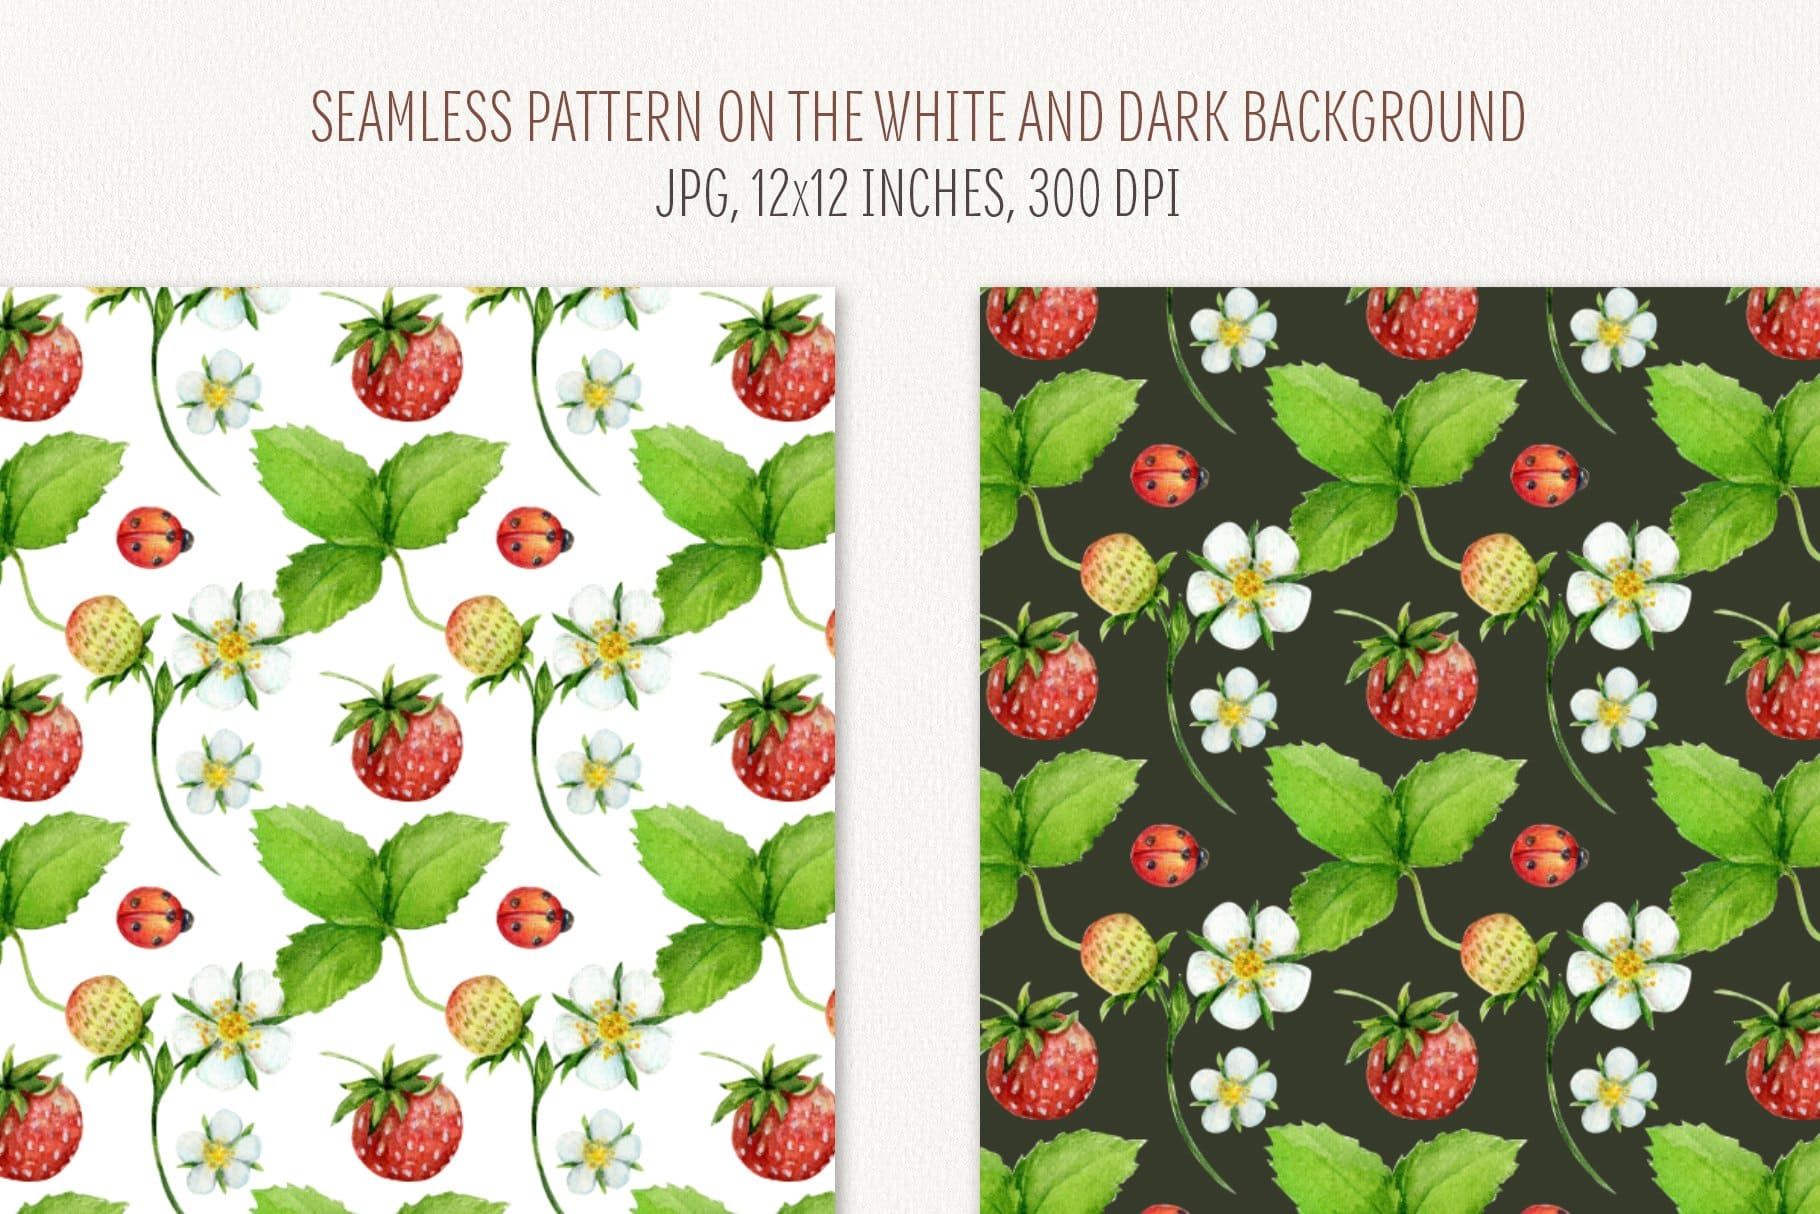 Strawberry leaves and strawberry berries on white and black backgrounds.